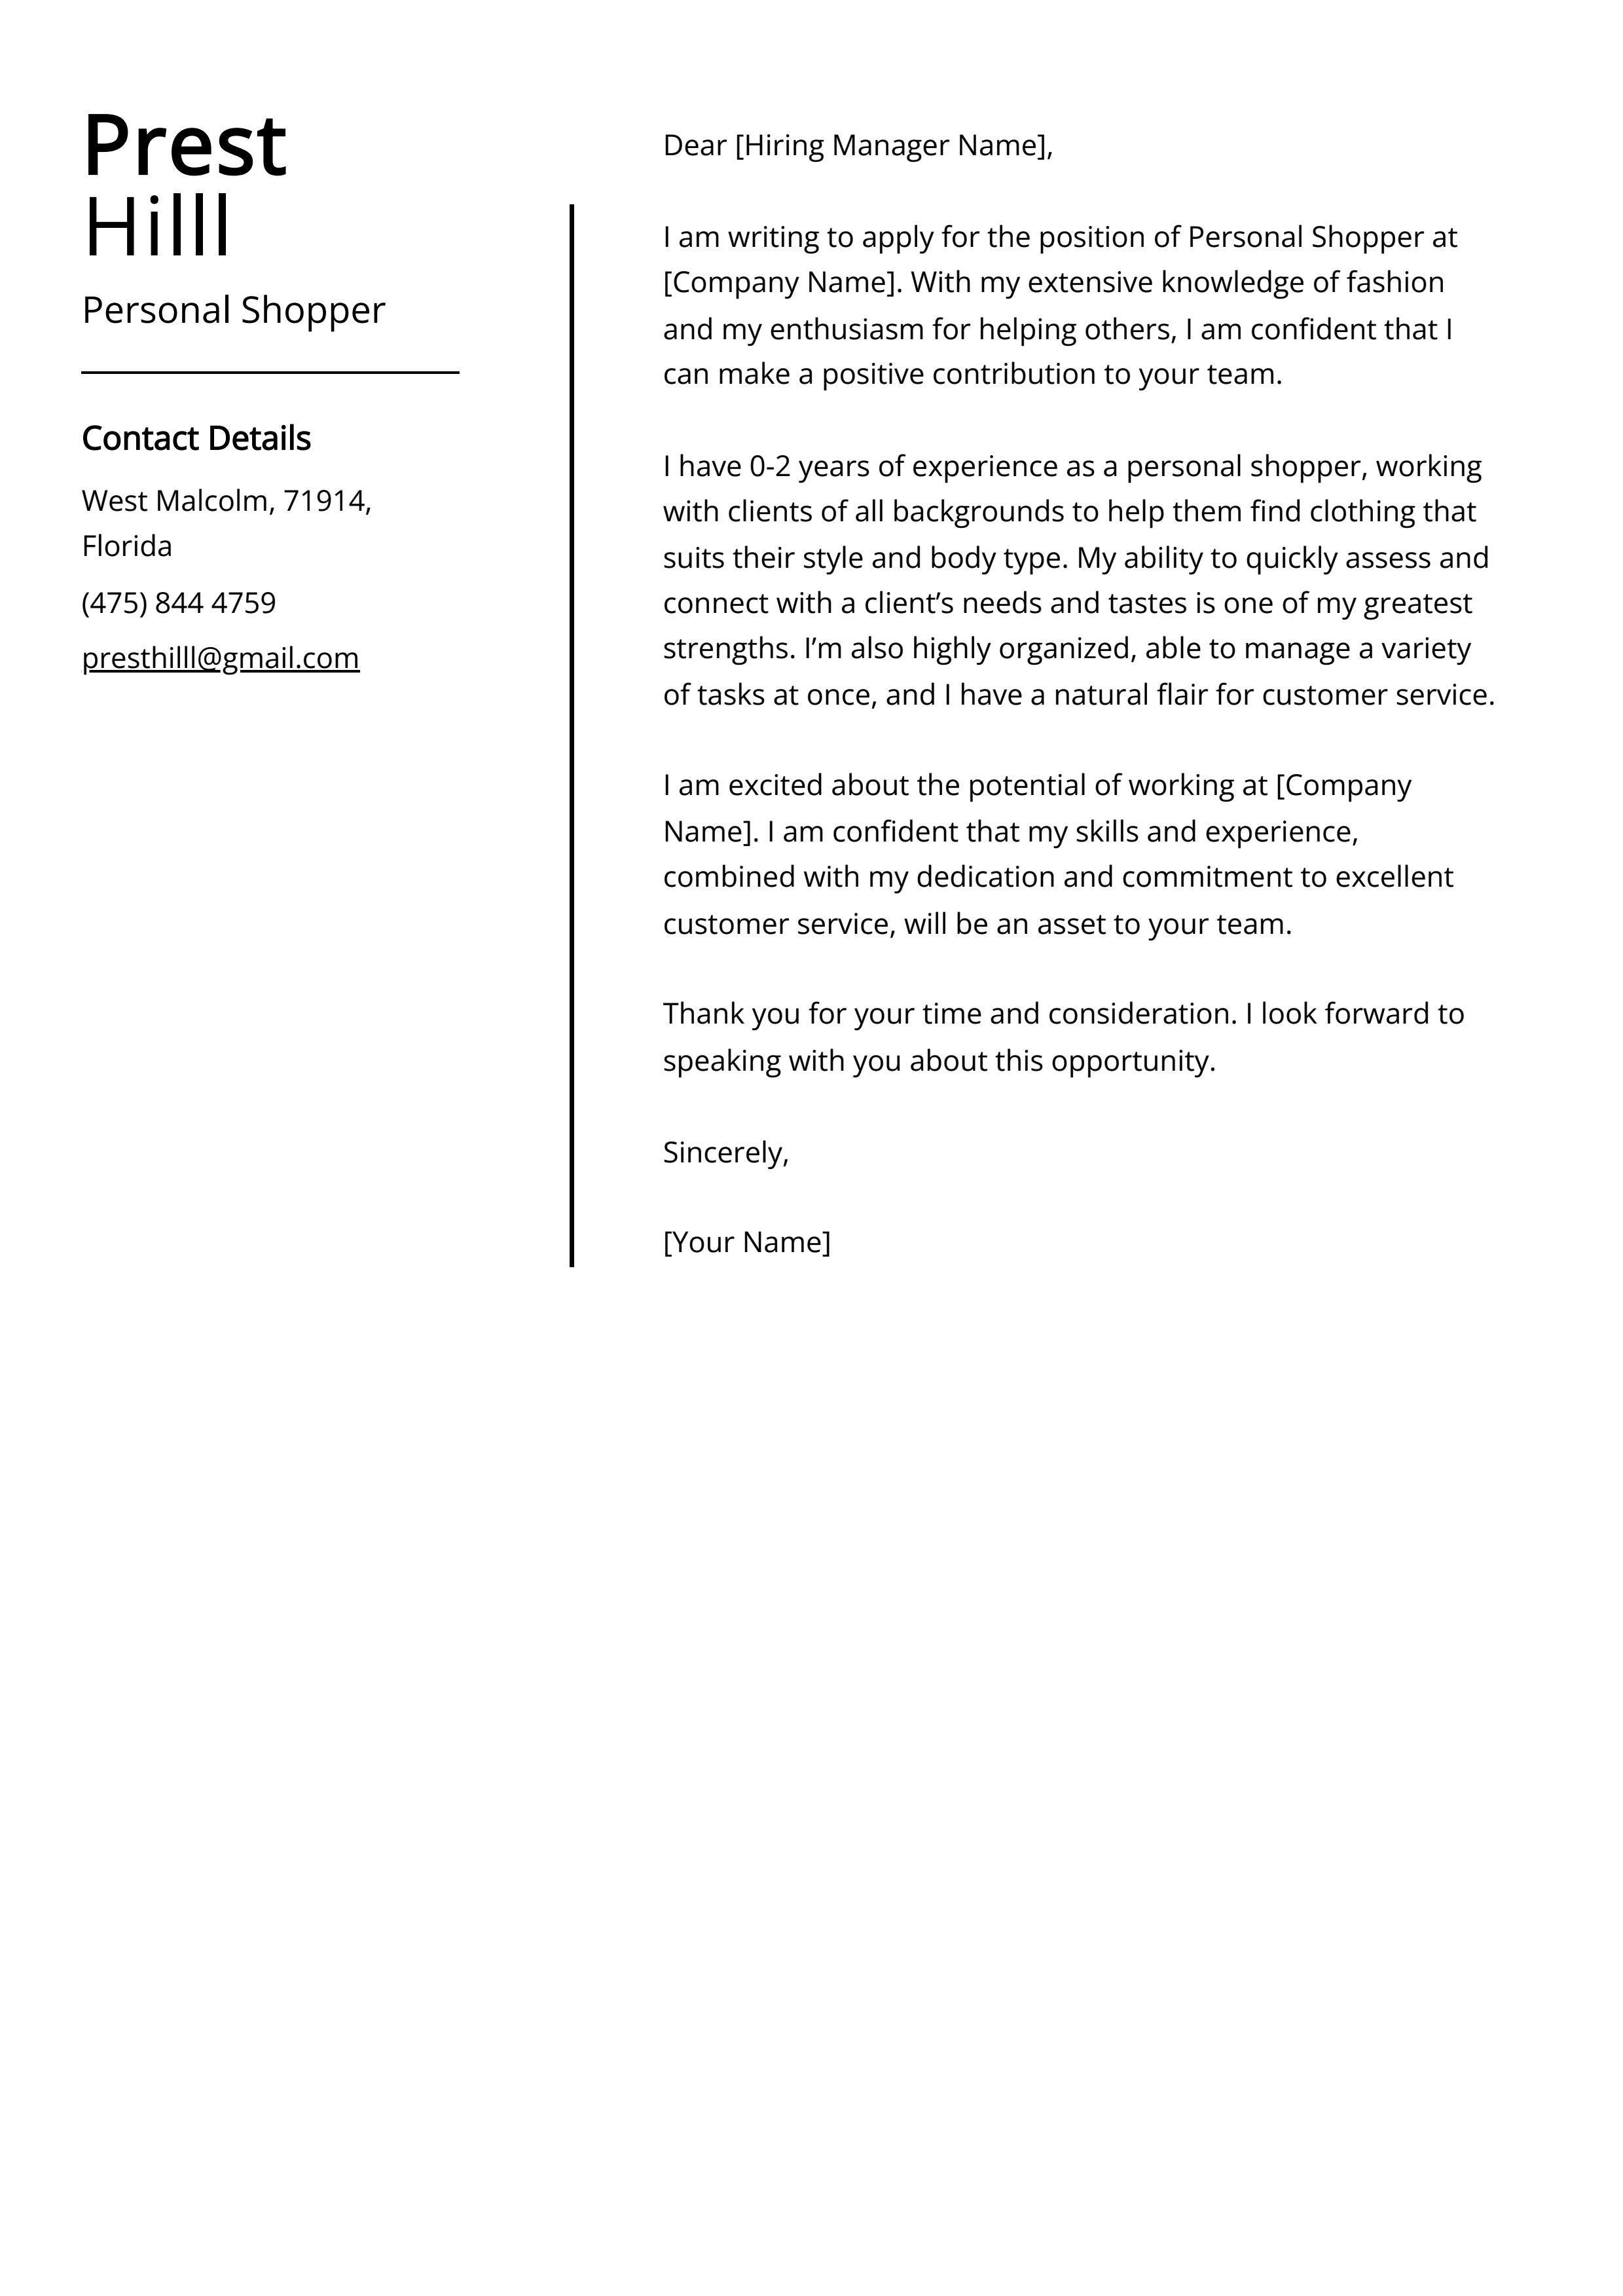 Personal Shopper Cover Letter Example